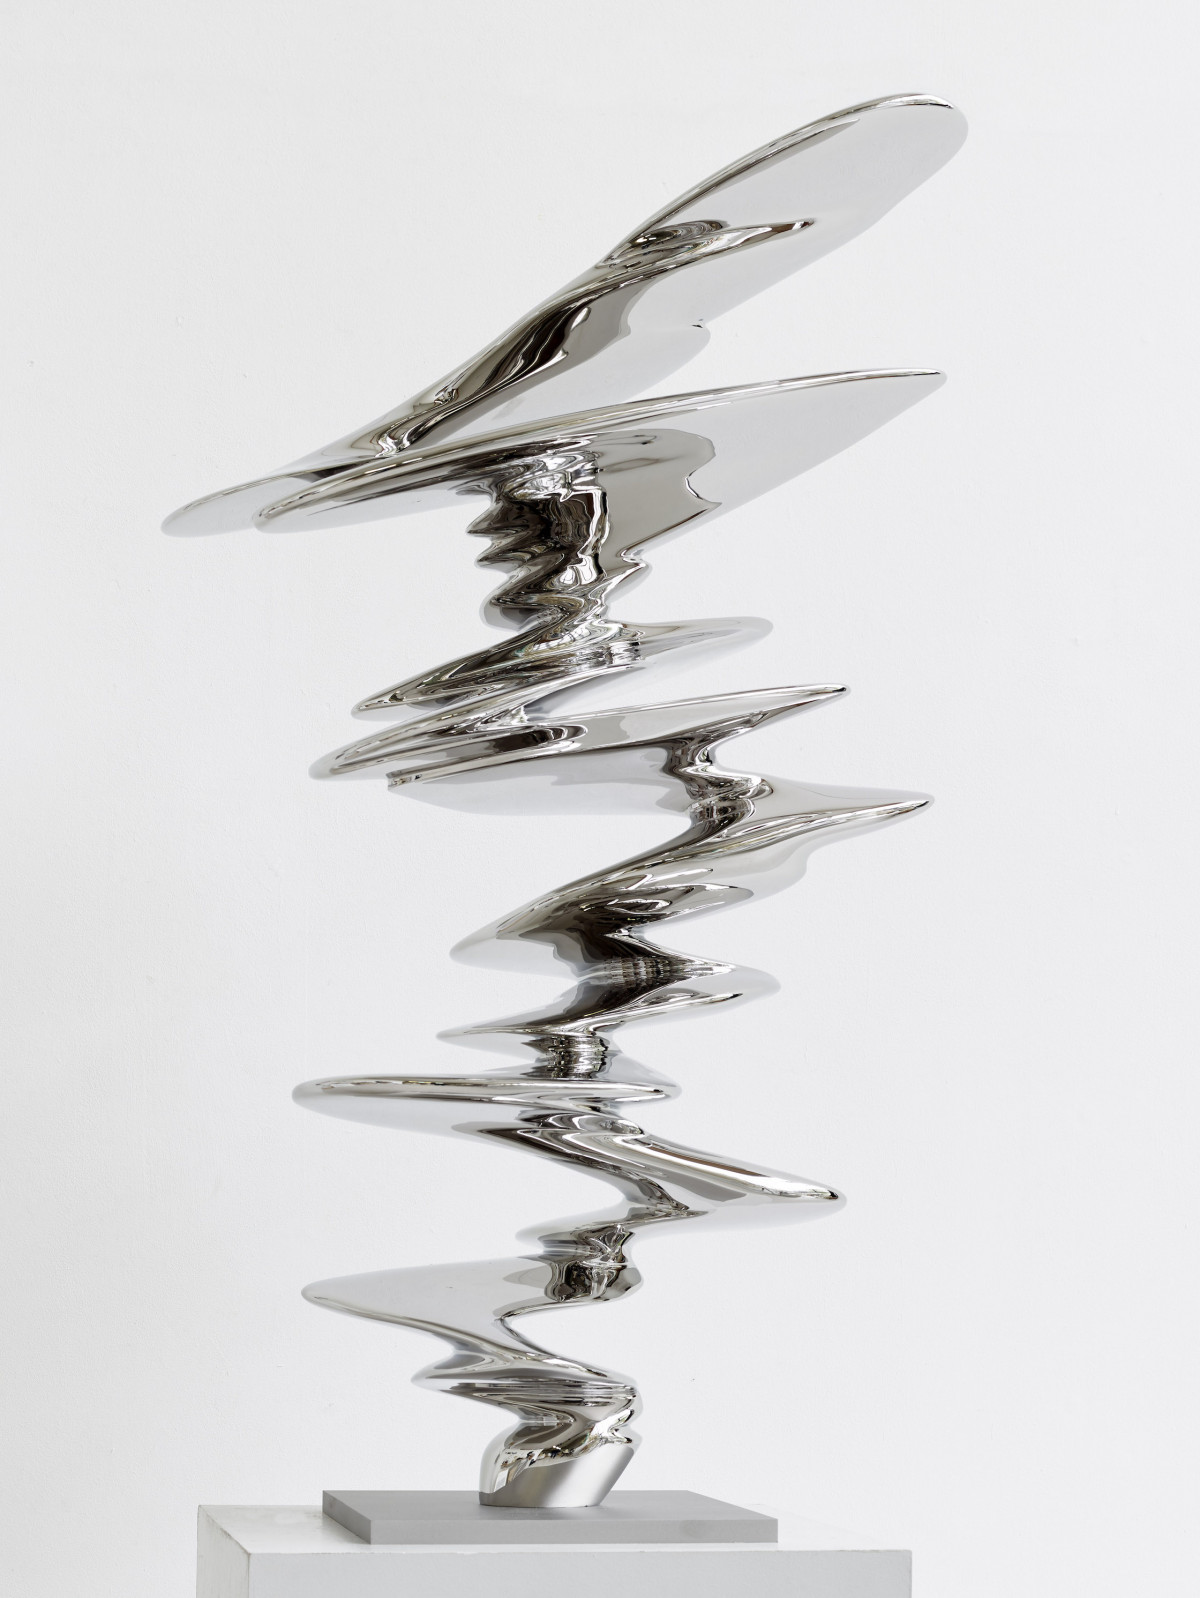 Tony Cragg, ‘Curve’, 2020, Stainless steel